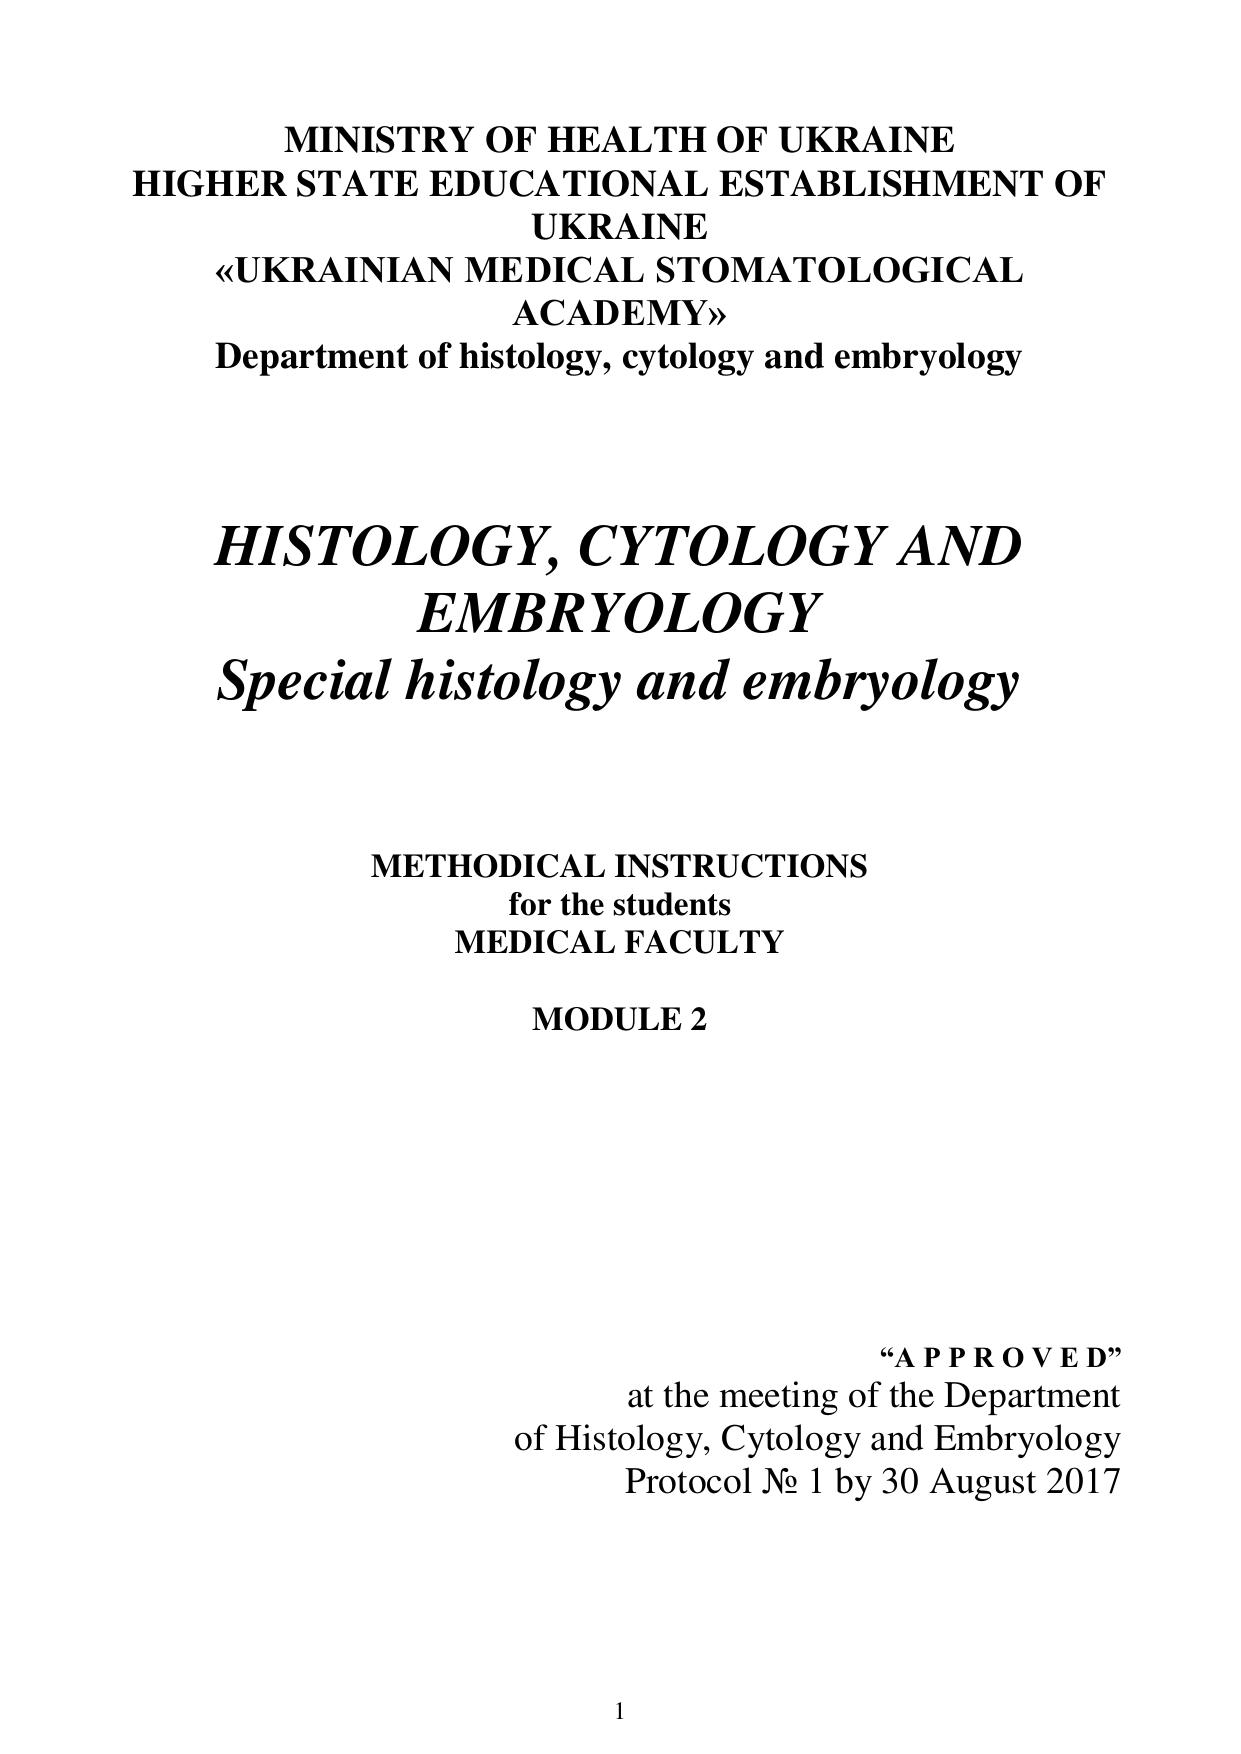 HISTOLOGY, CYTOLOGY AND EMBRYOLOGY Special histology and embryology 2017